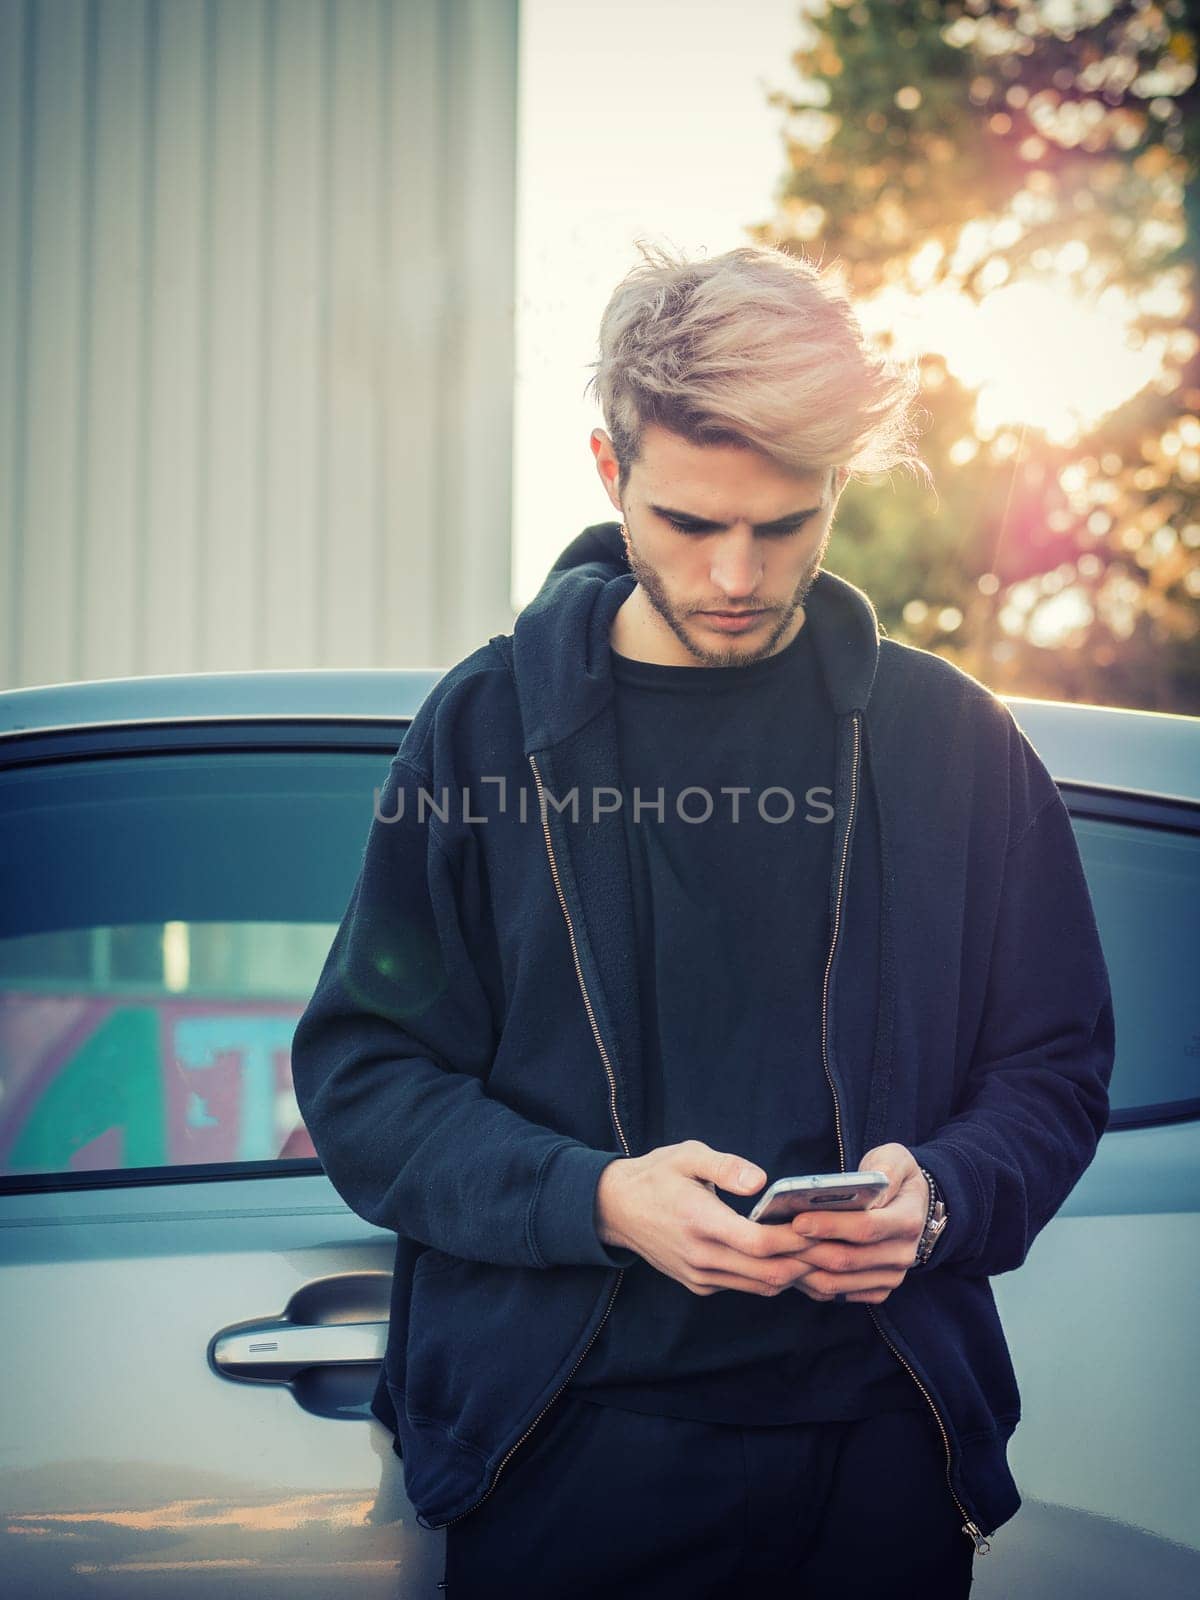 Photo of a man using his cell phone while standing in front of a car by artofphoto